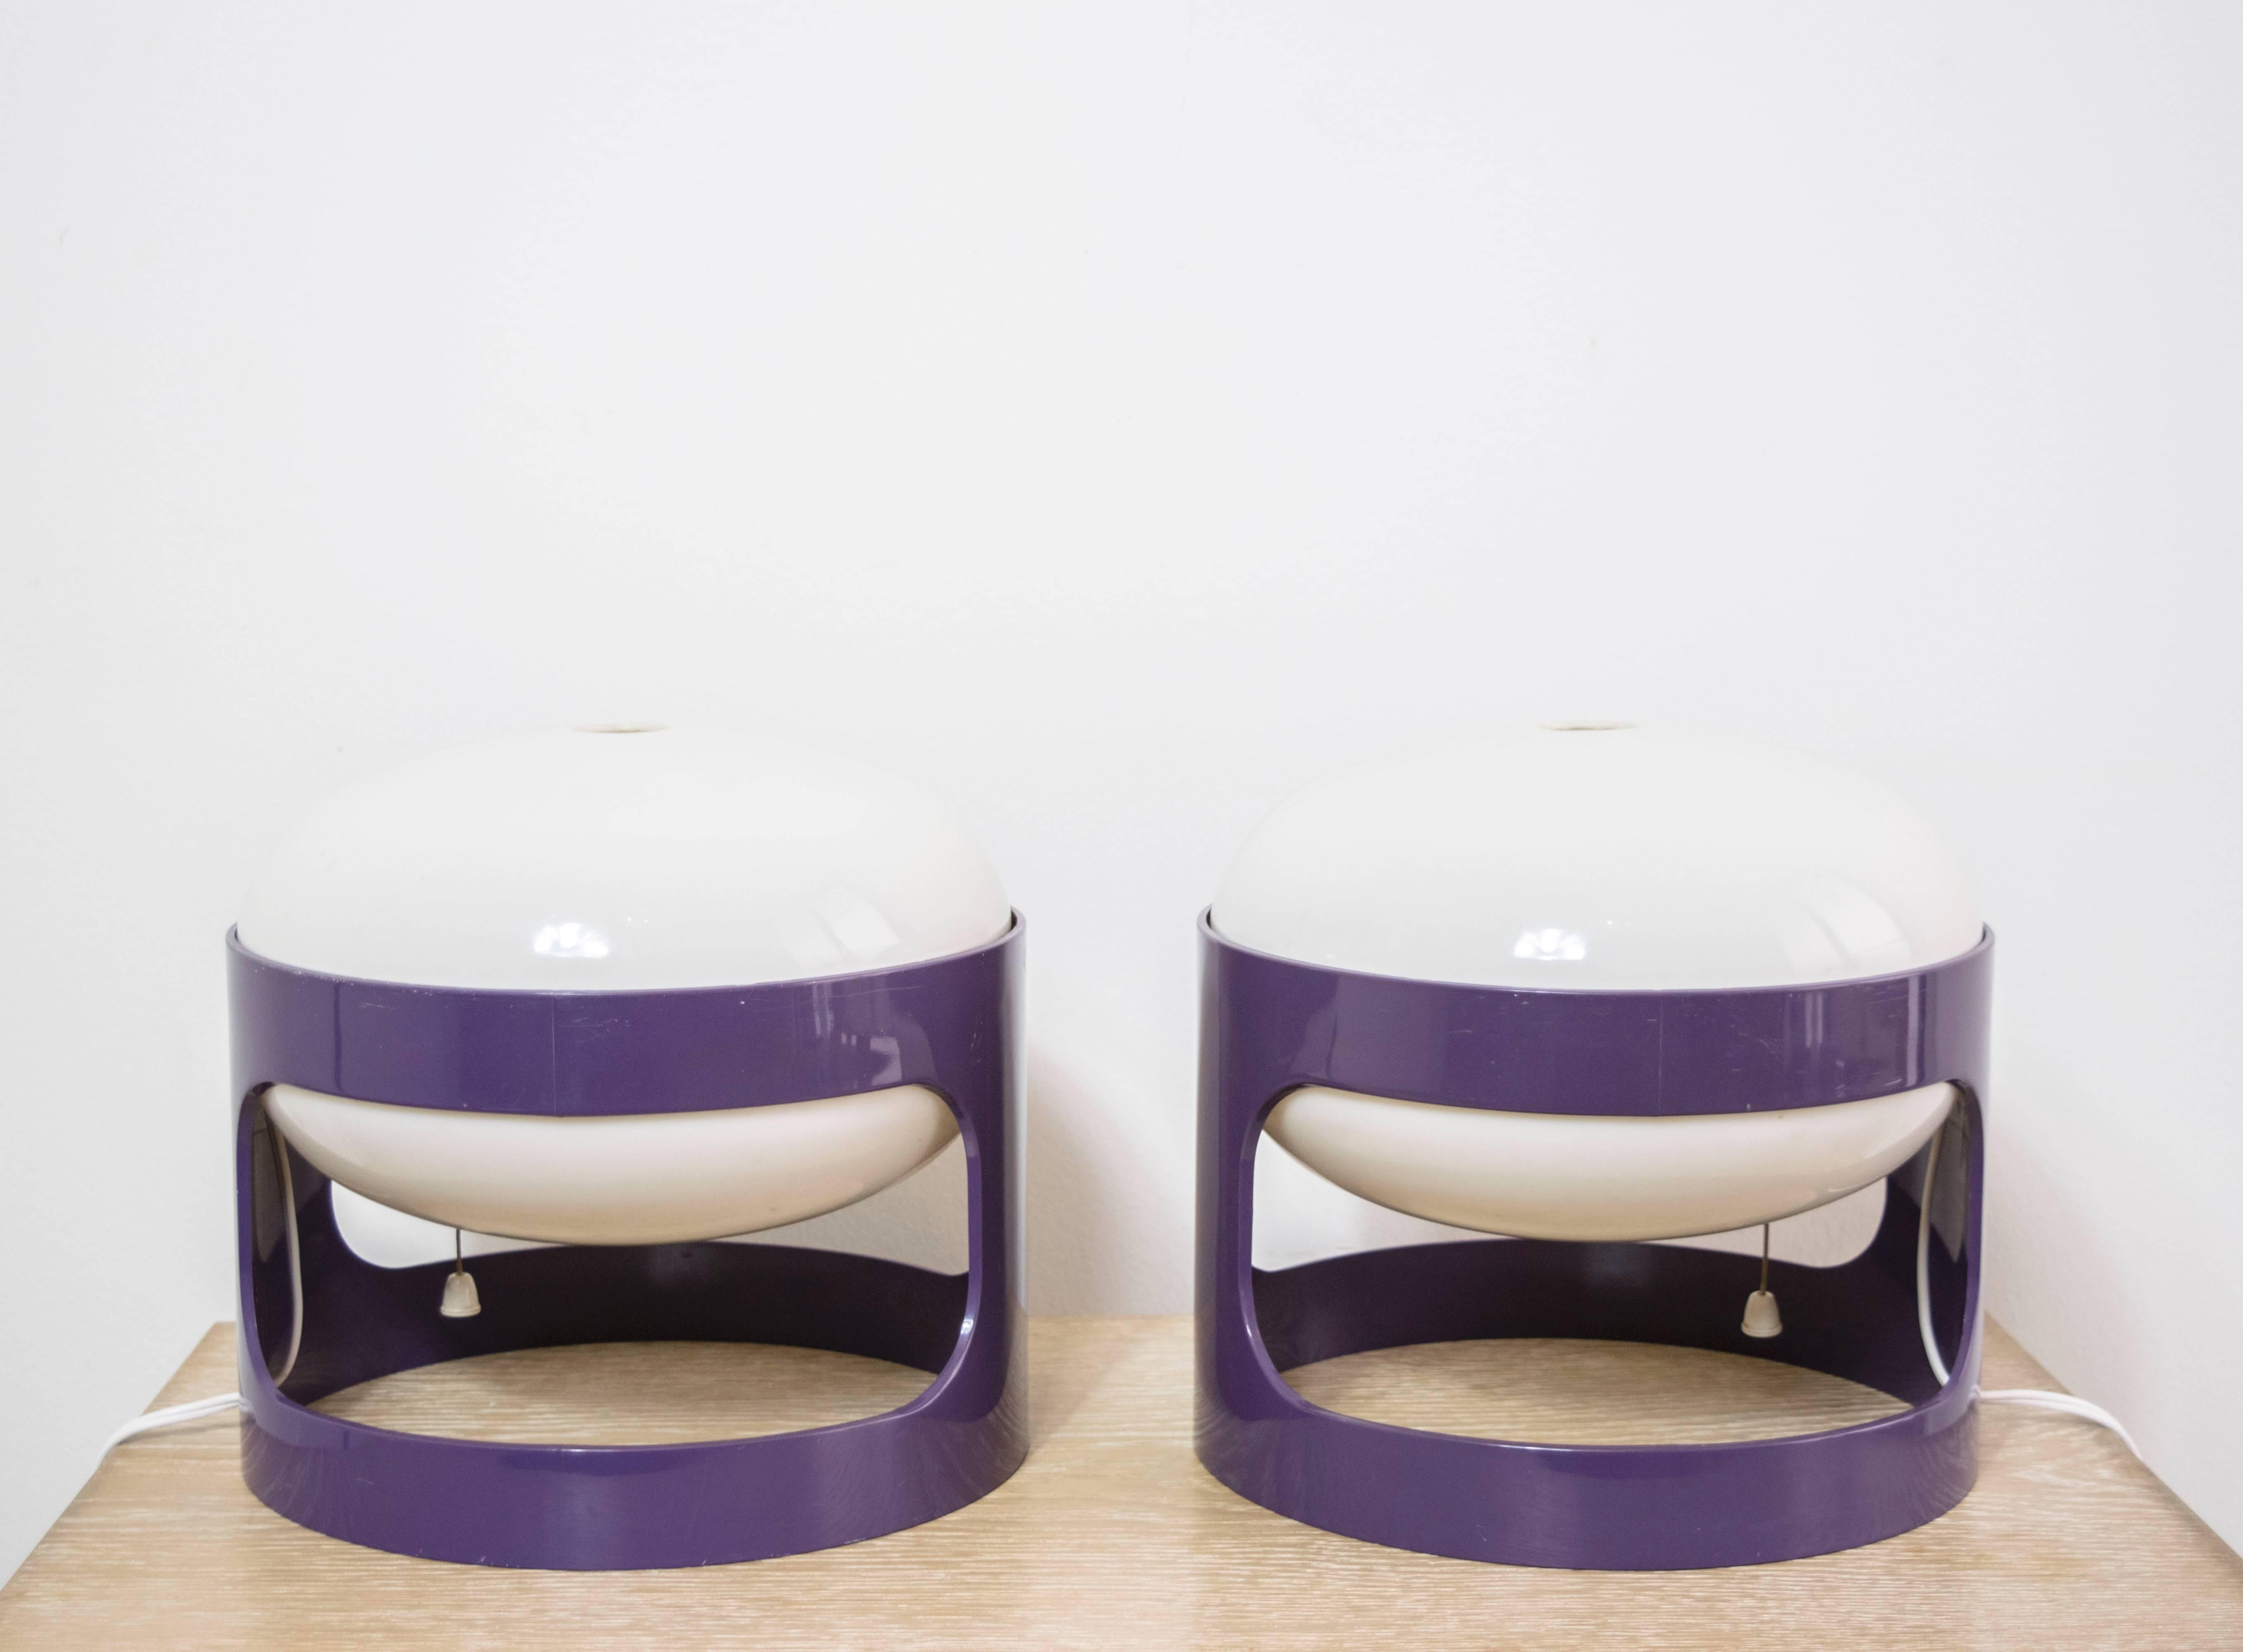 These Joe Colombo KD27 lamps manufactured by Kartell are extremely rare, especially in this vibrant purple.